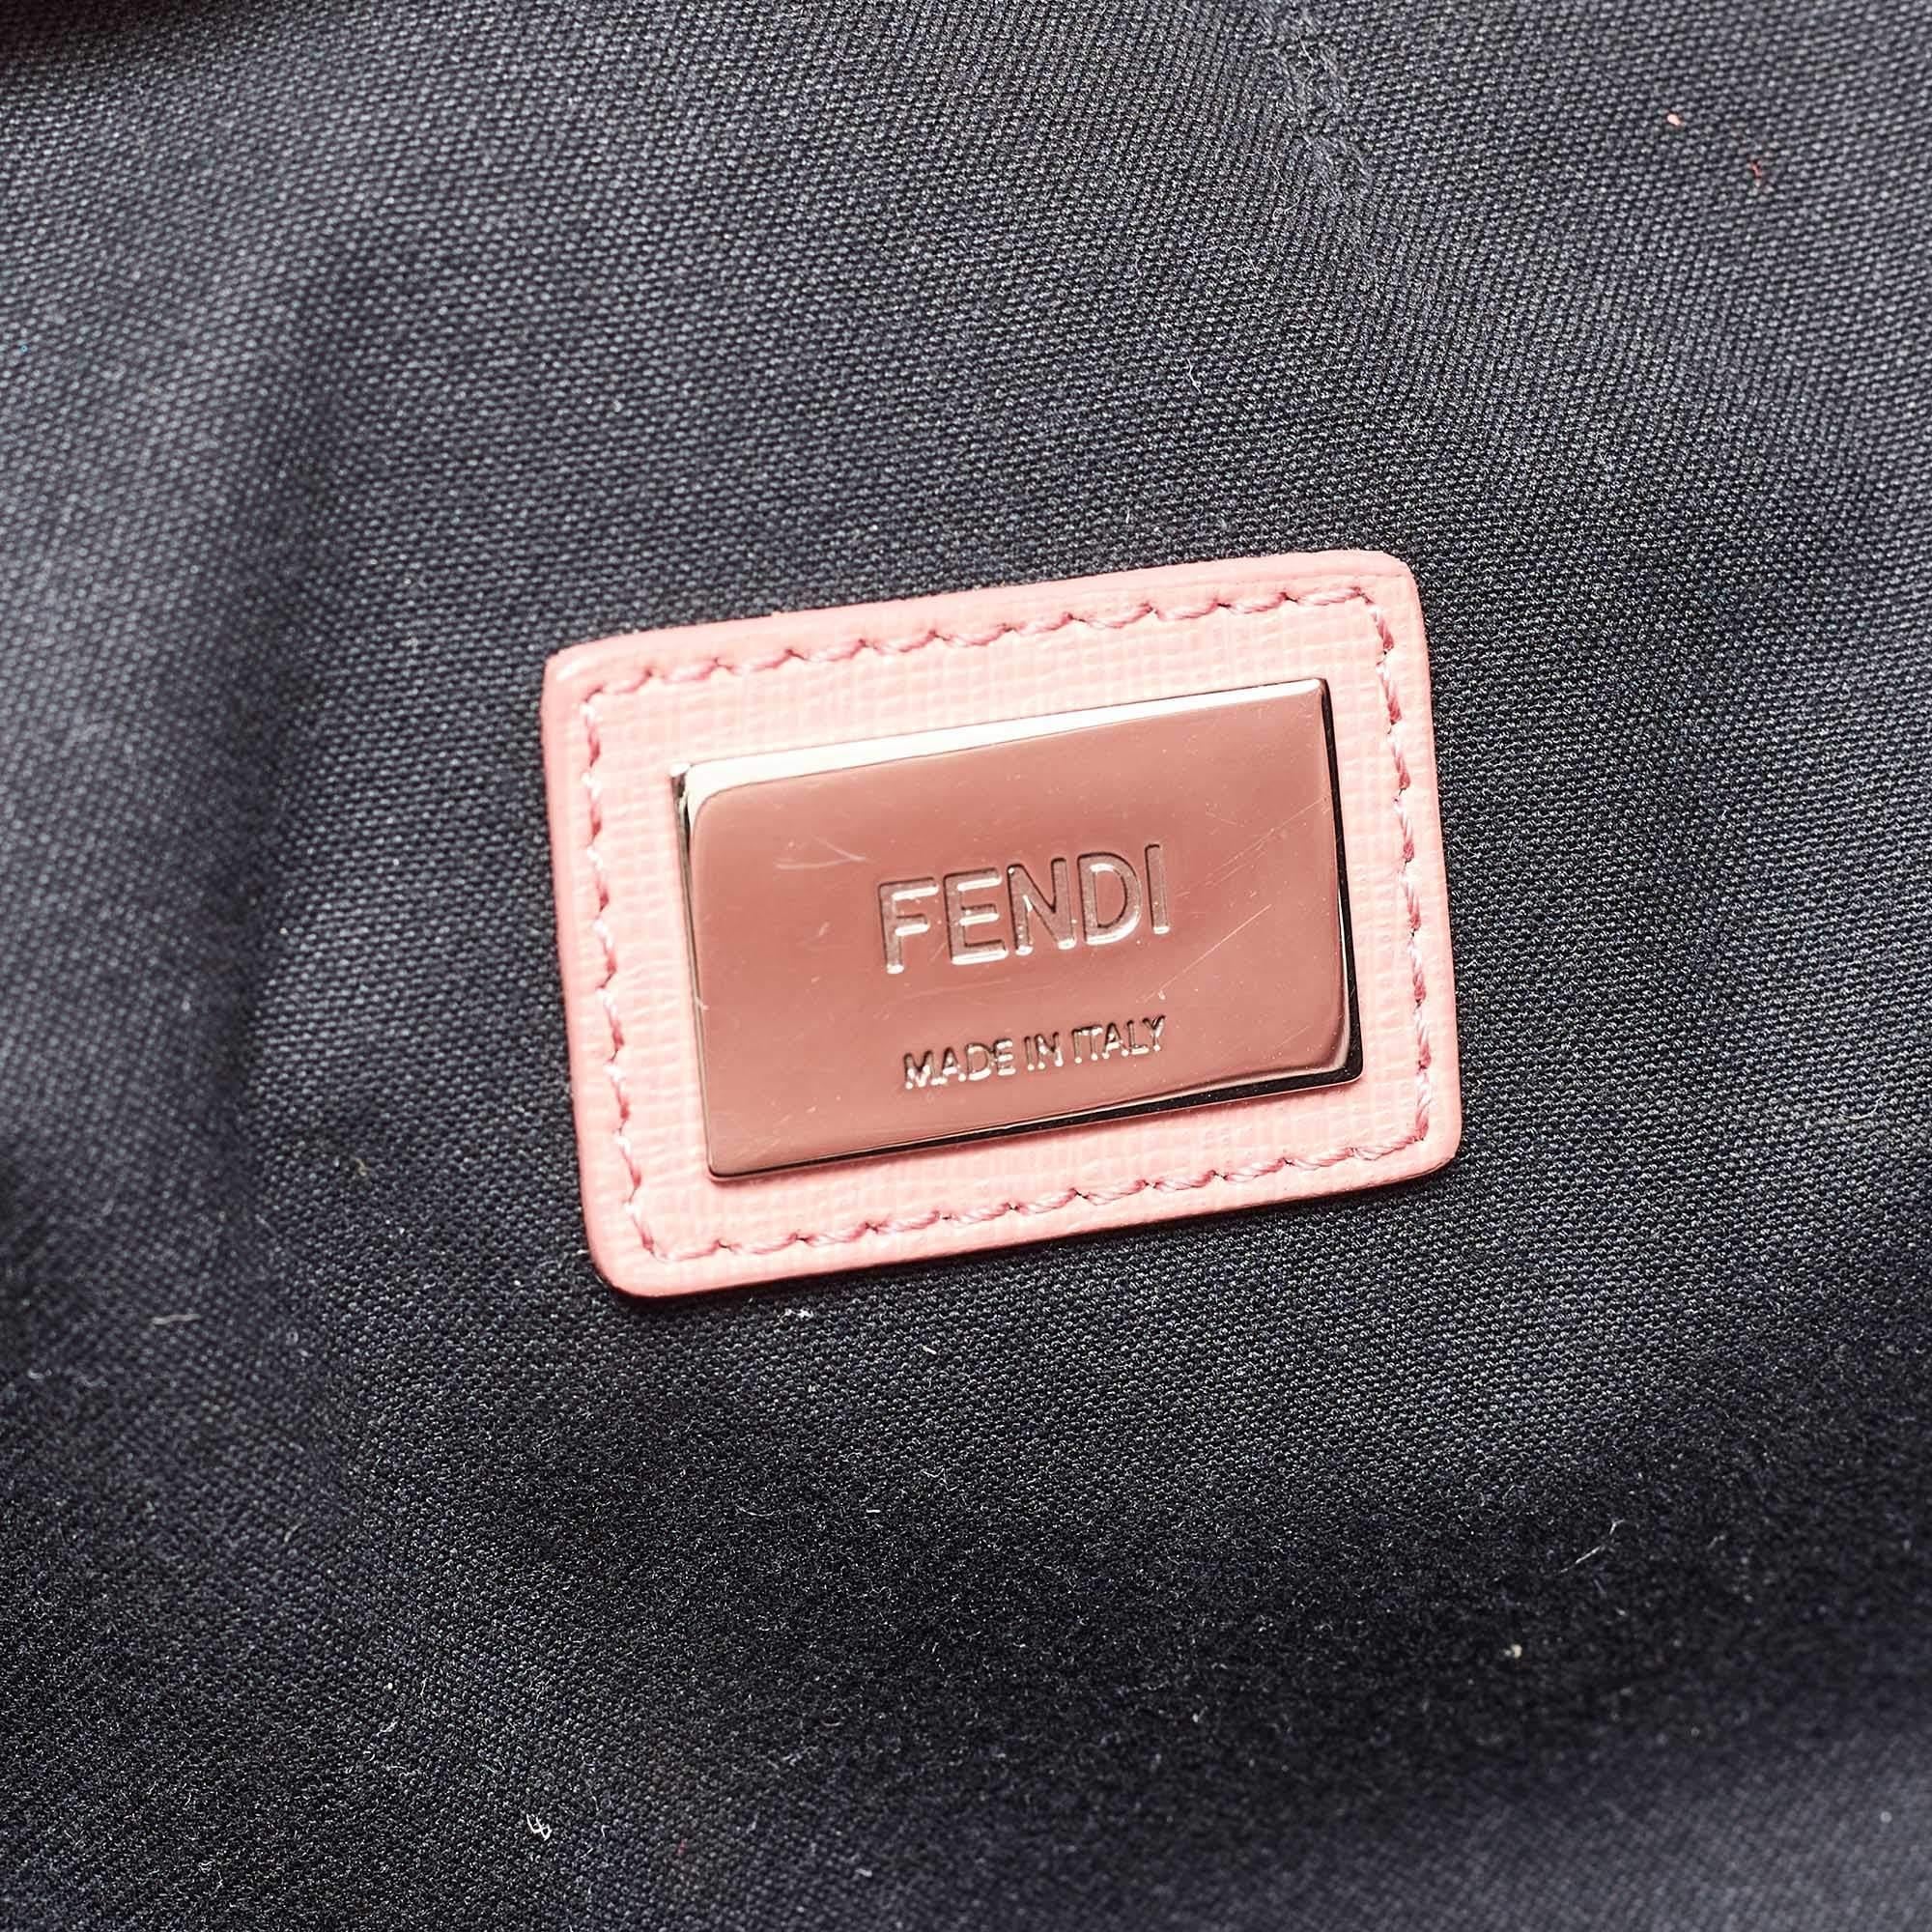 Fendi Black/Peach Leather Monster Roll Tote For Sale 2